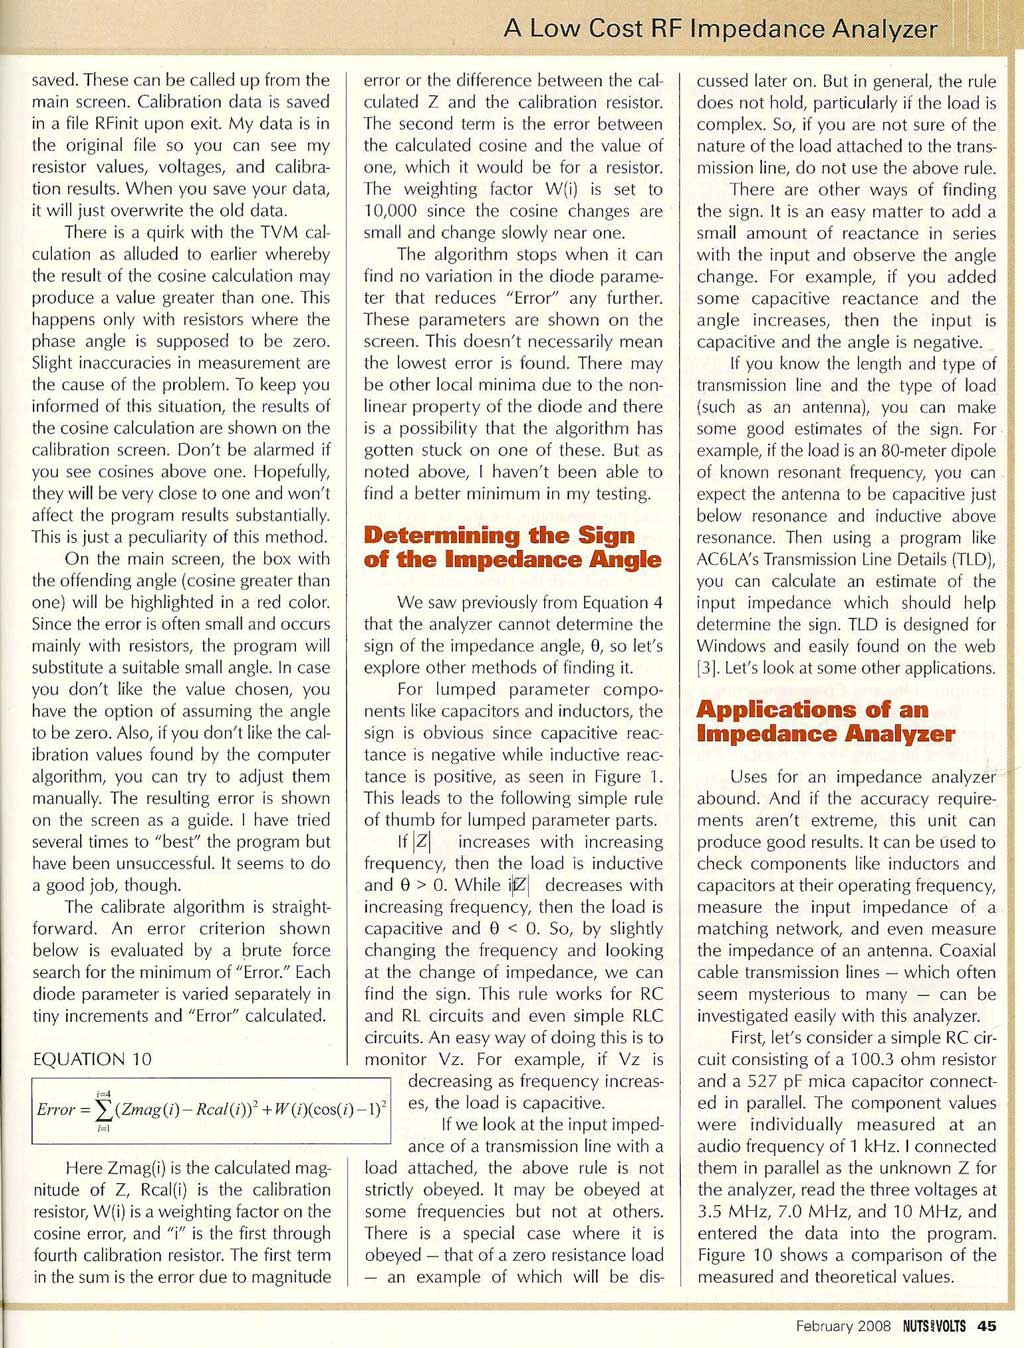 scanned page 45 from Nuts & Volts, Feb 2008